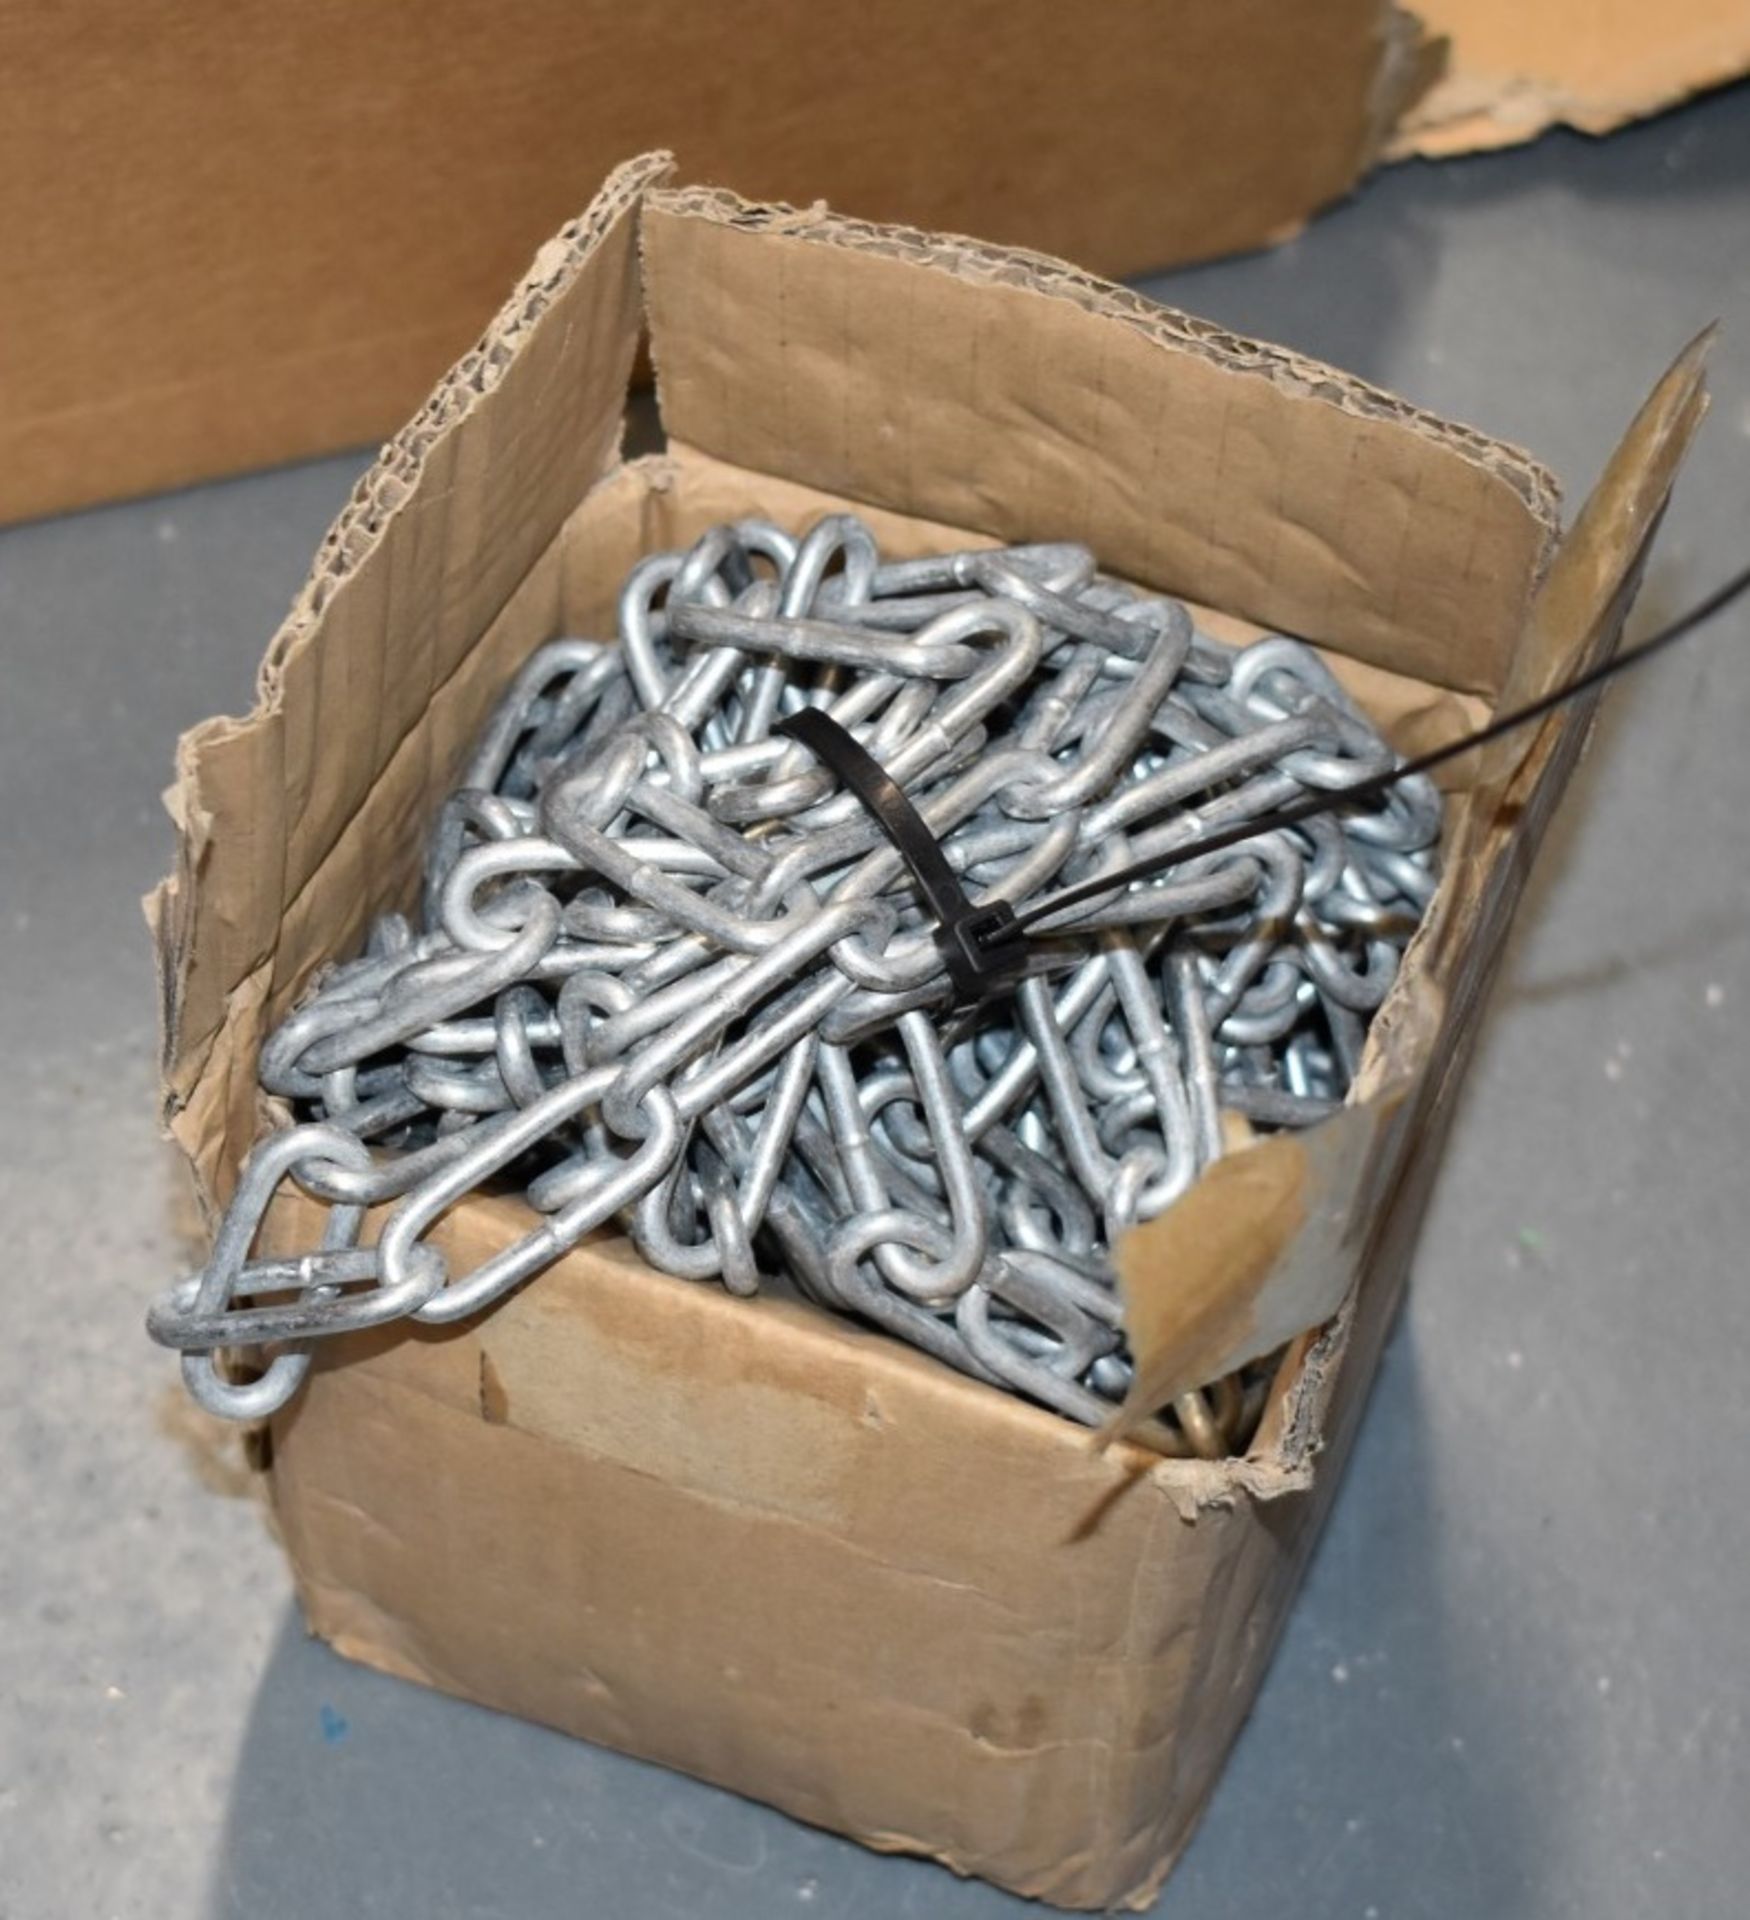 1 x Assorted Lot of Link Chain - Includes 175' Link Chain Reel, 20 Bags of Chain and Box of Chain - Image 5 of 9